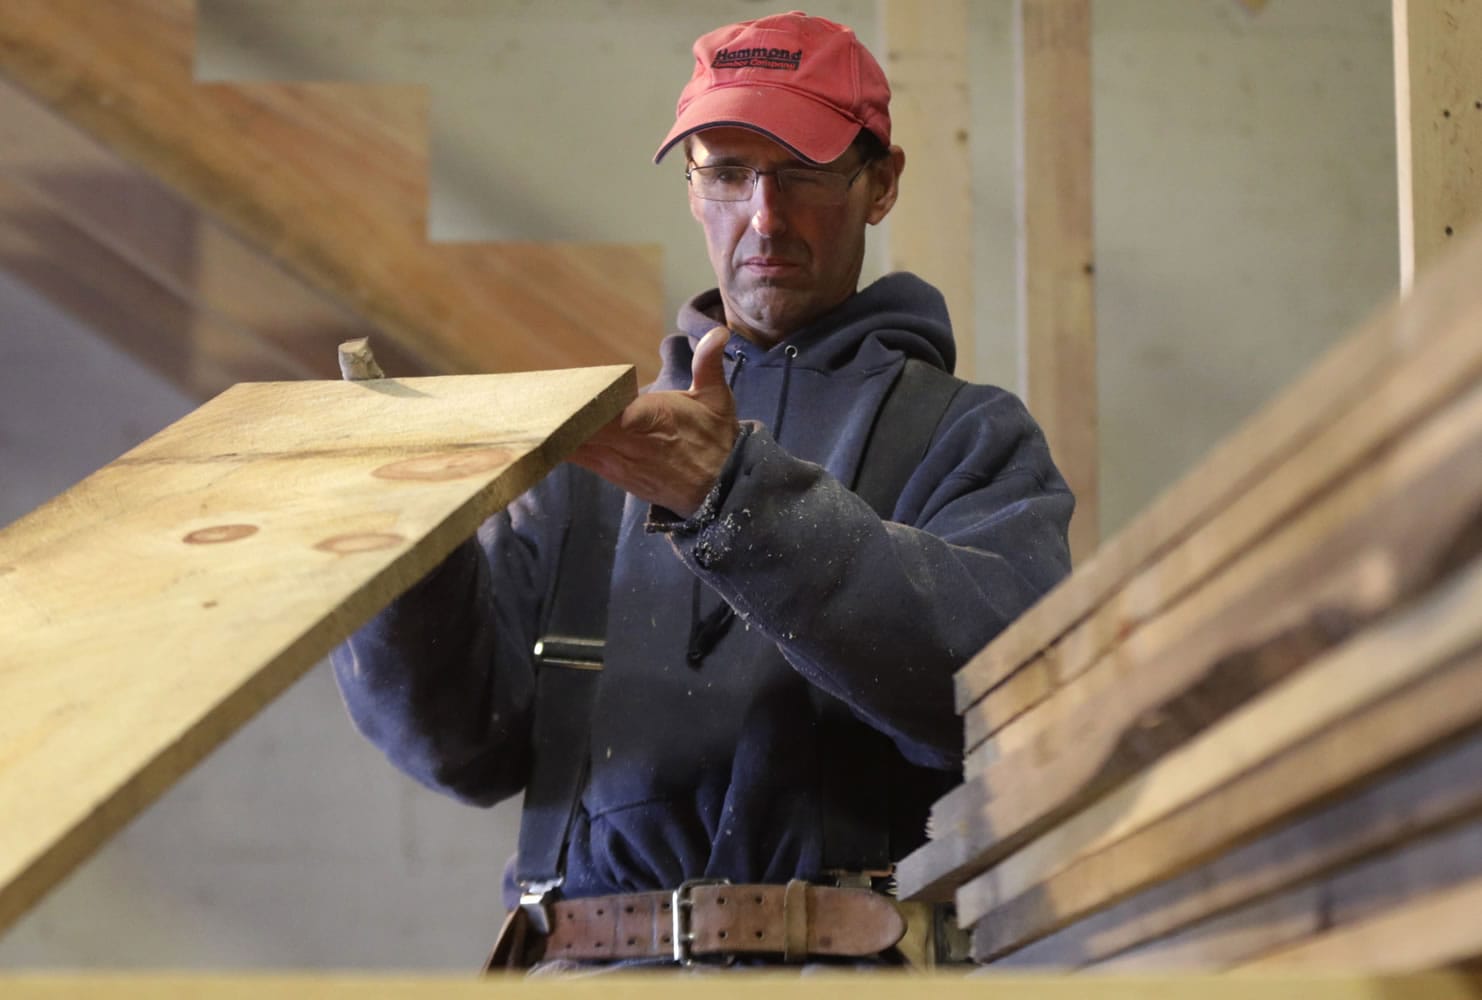 Ken Voorhees examines a board for defects while building a stairway for a customer in Lisbon, Maine. Voorhees, who is self-employed, signed up for health insurance with Maine Health Community Options.